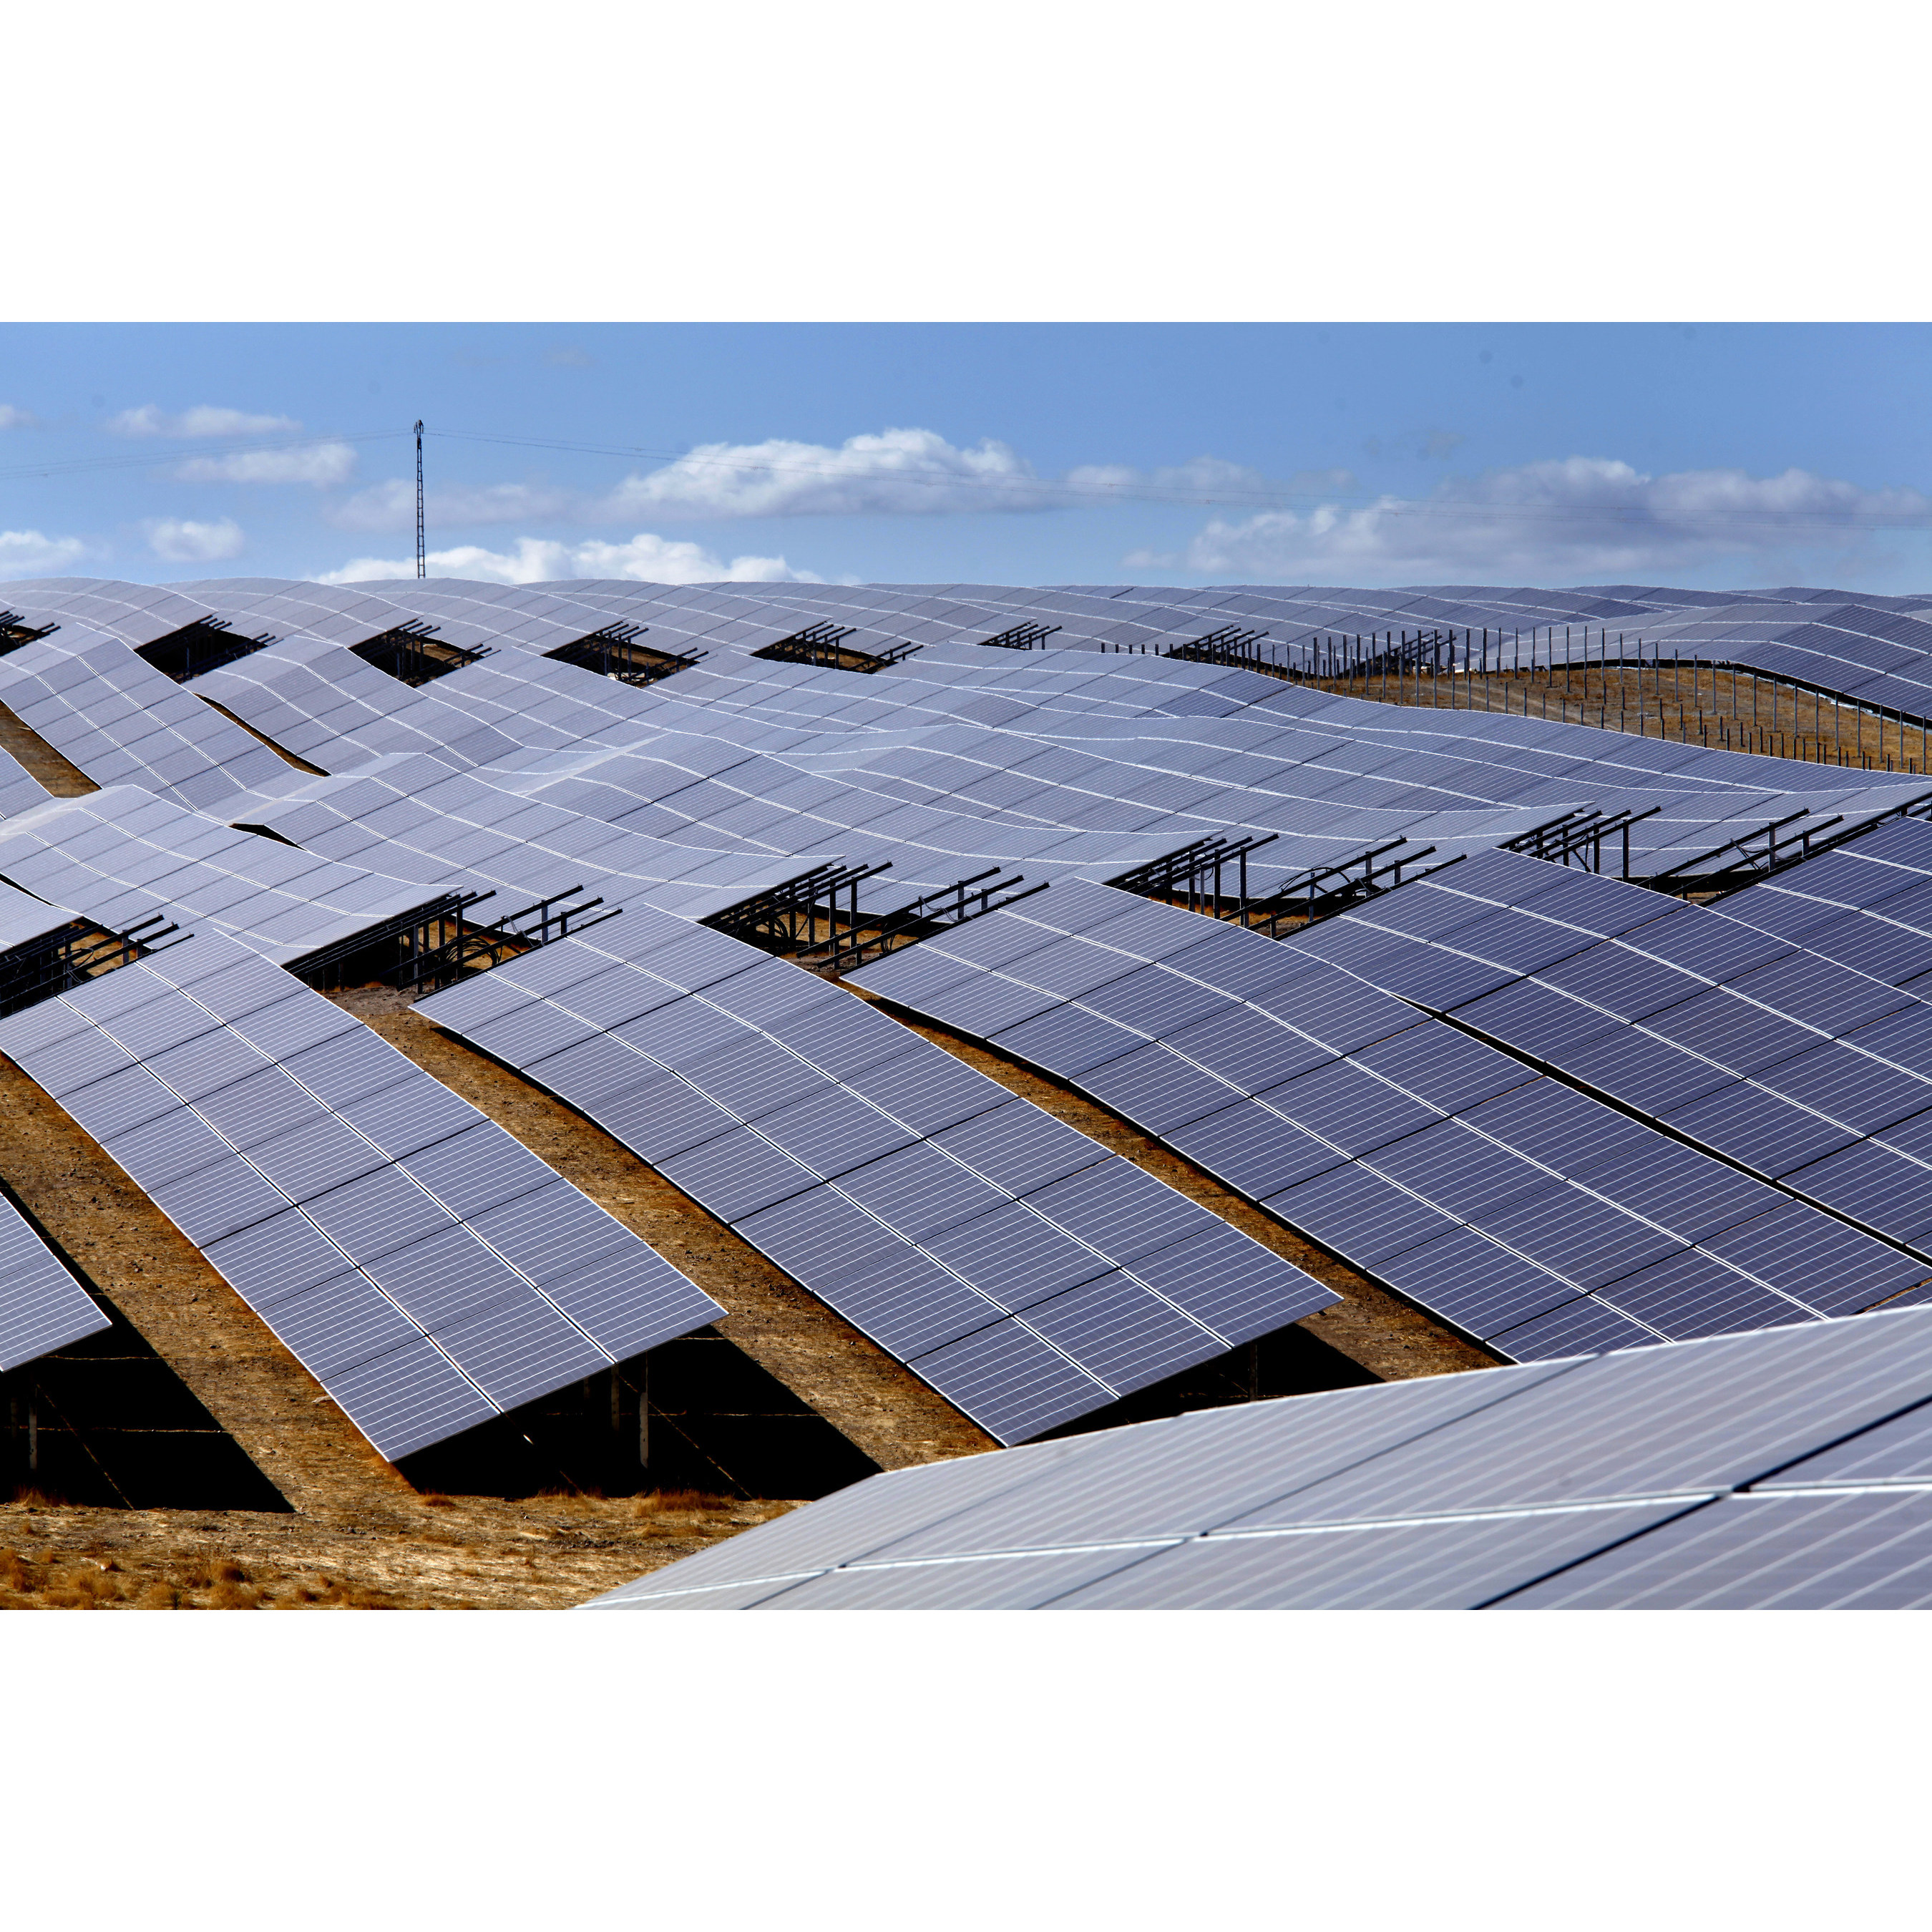 GCL-SI Supplies 150 MW Solar Modules for the Largest Solar Project in Europe